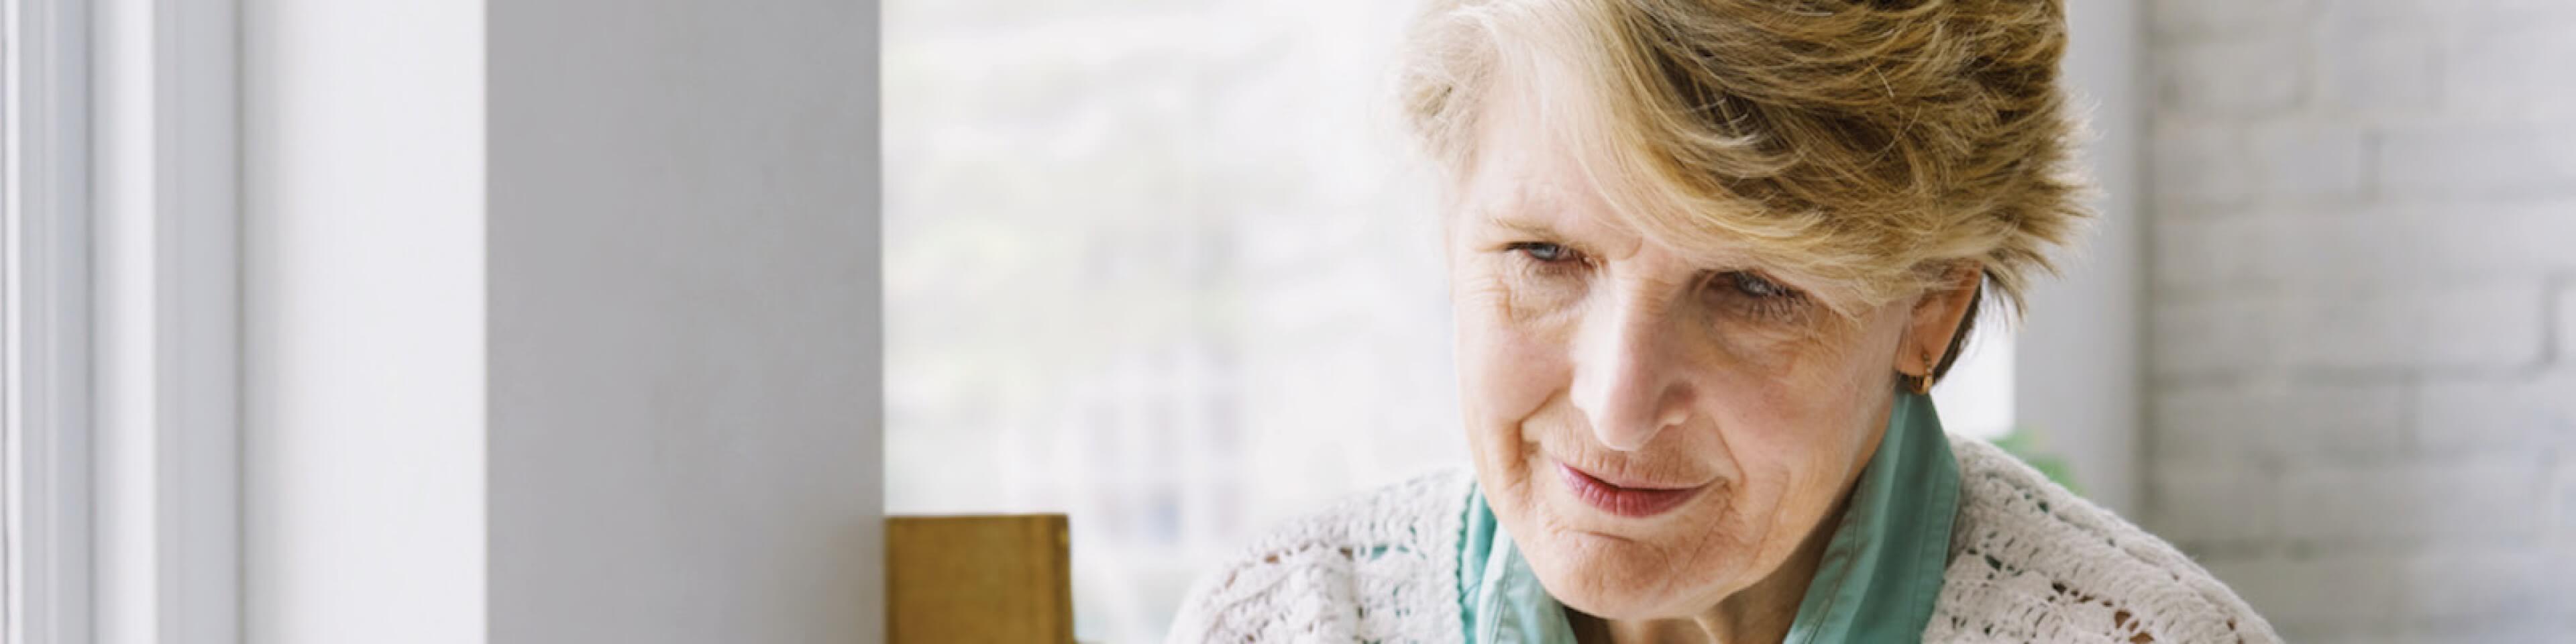 Older female patient thinking about her treatment options